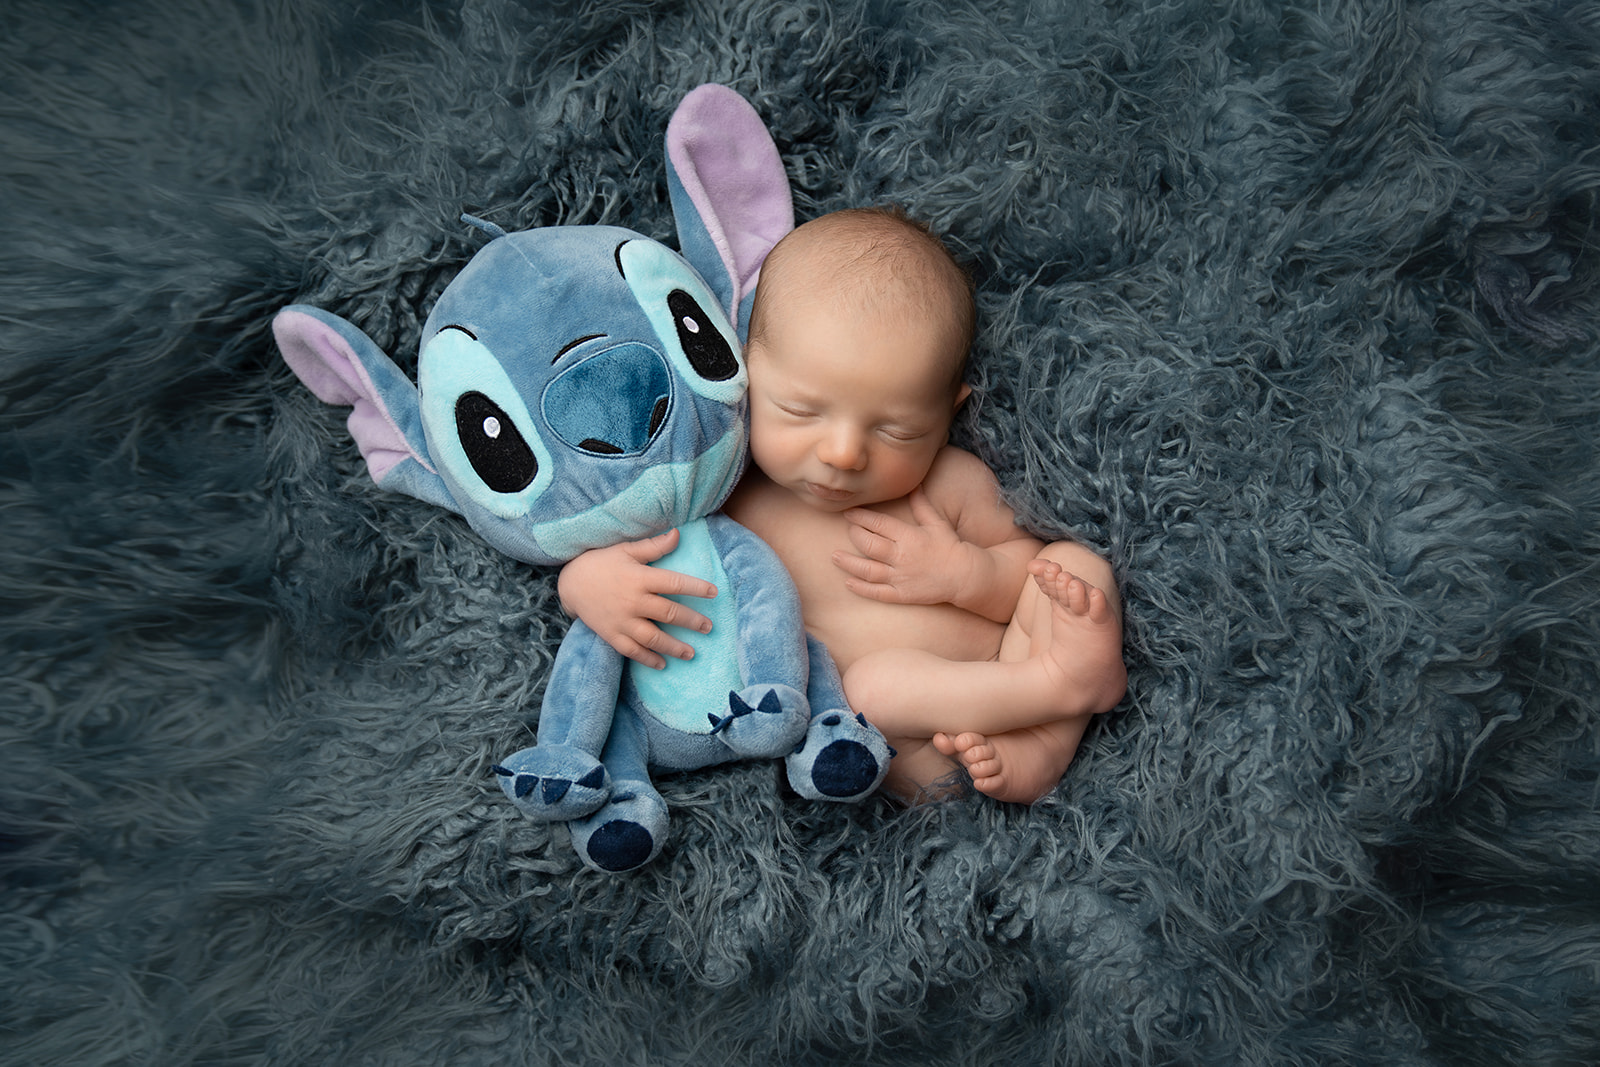 Baby props and toys with your newborn.